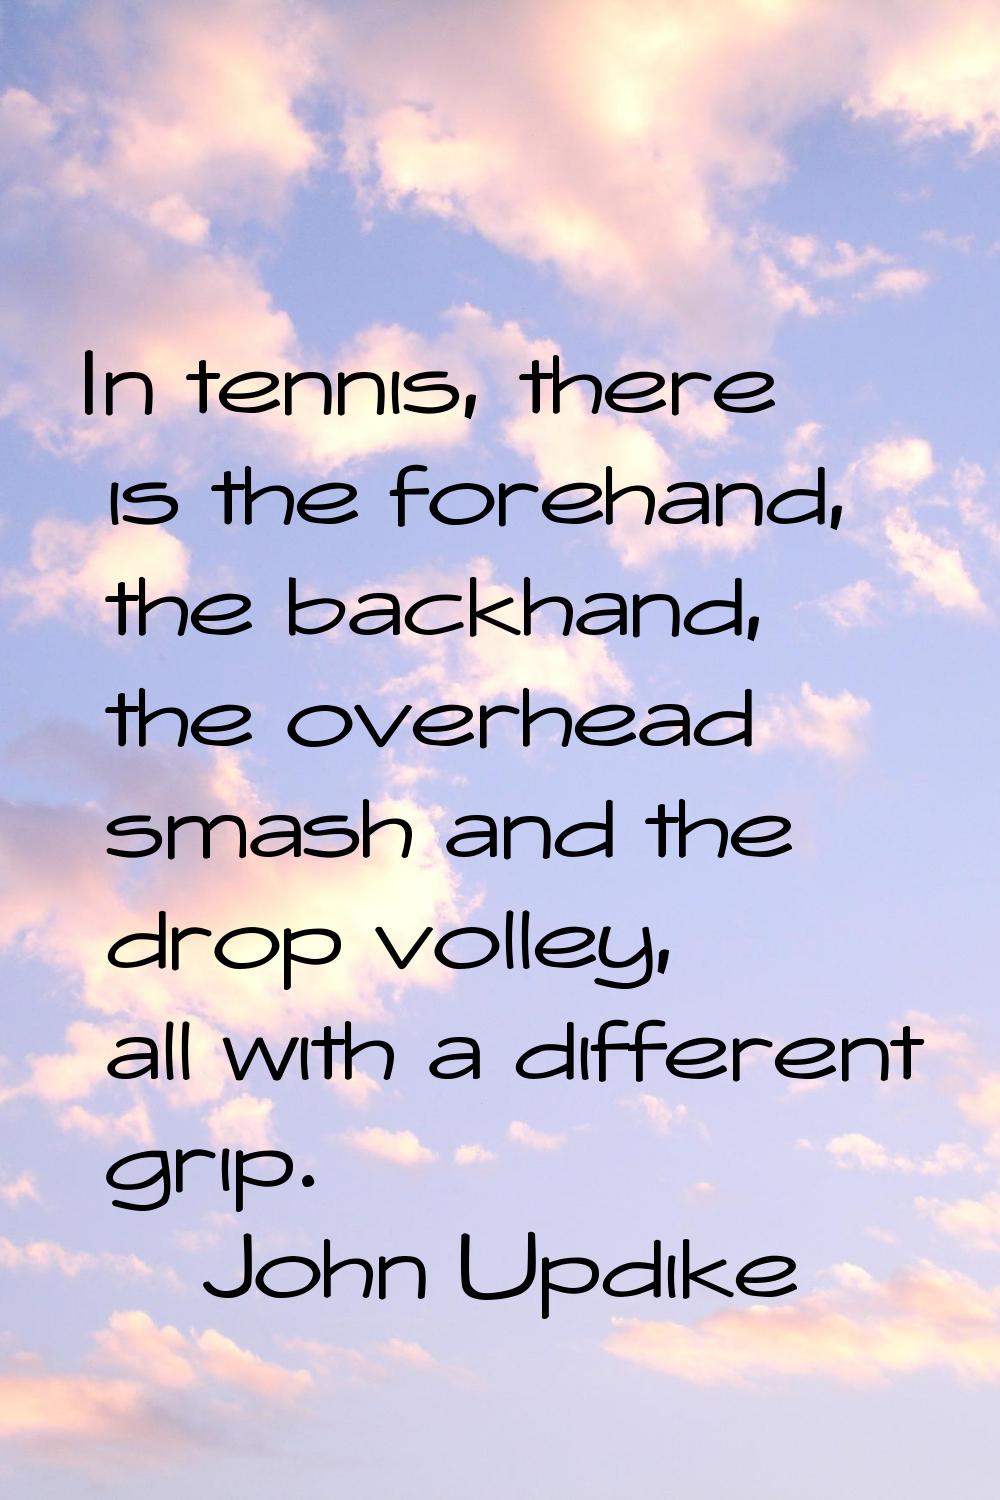 In tennis, there is the forehand, the backhand, the overhead smash and the drop volley, all with a 